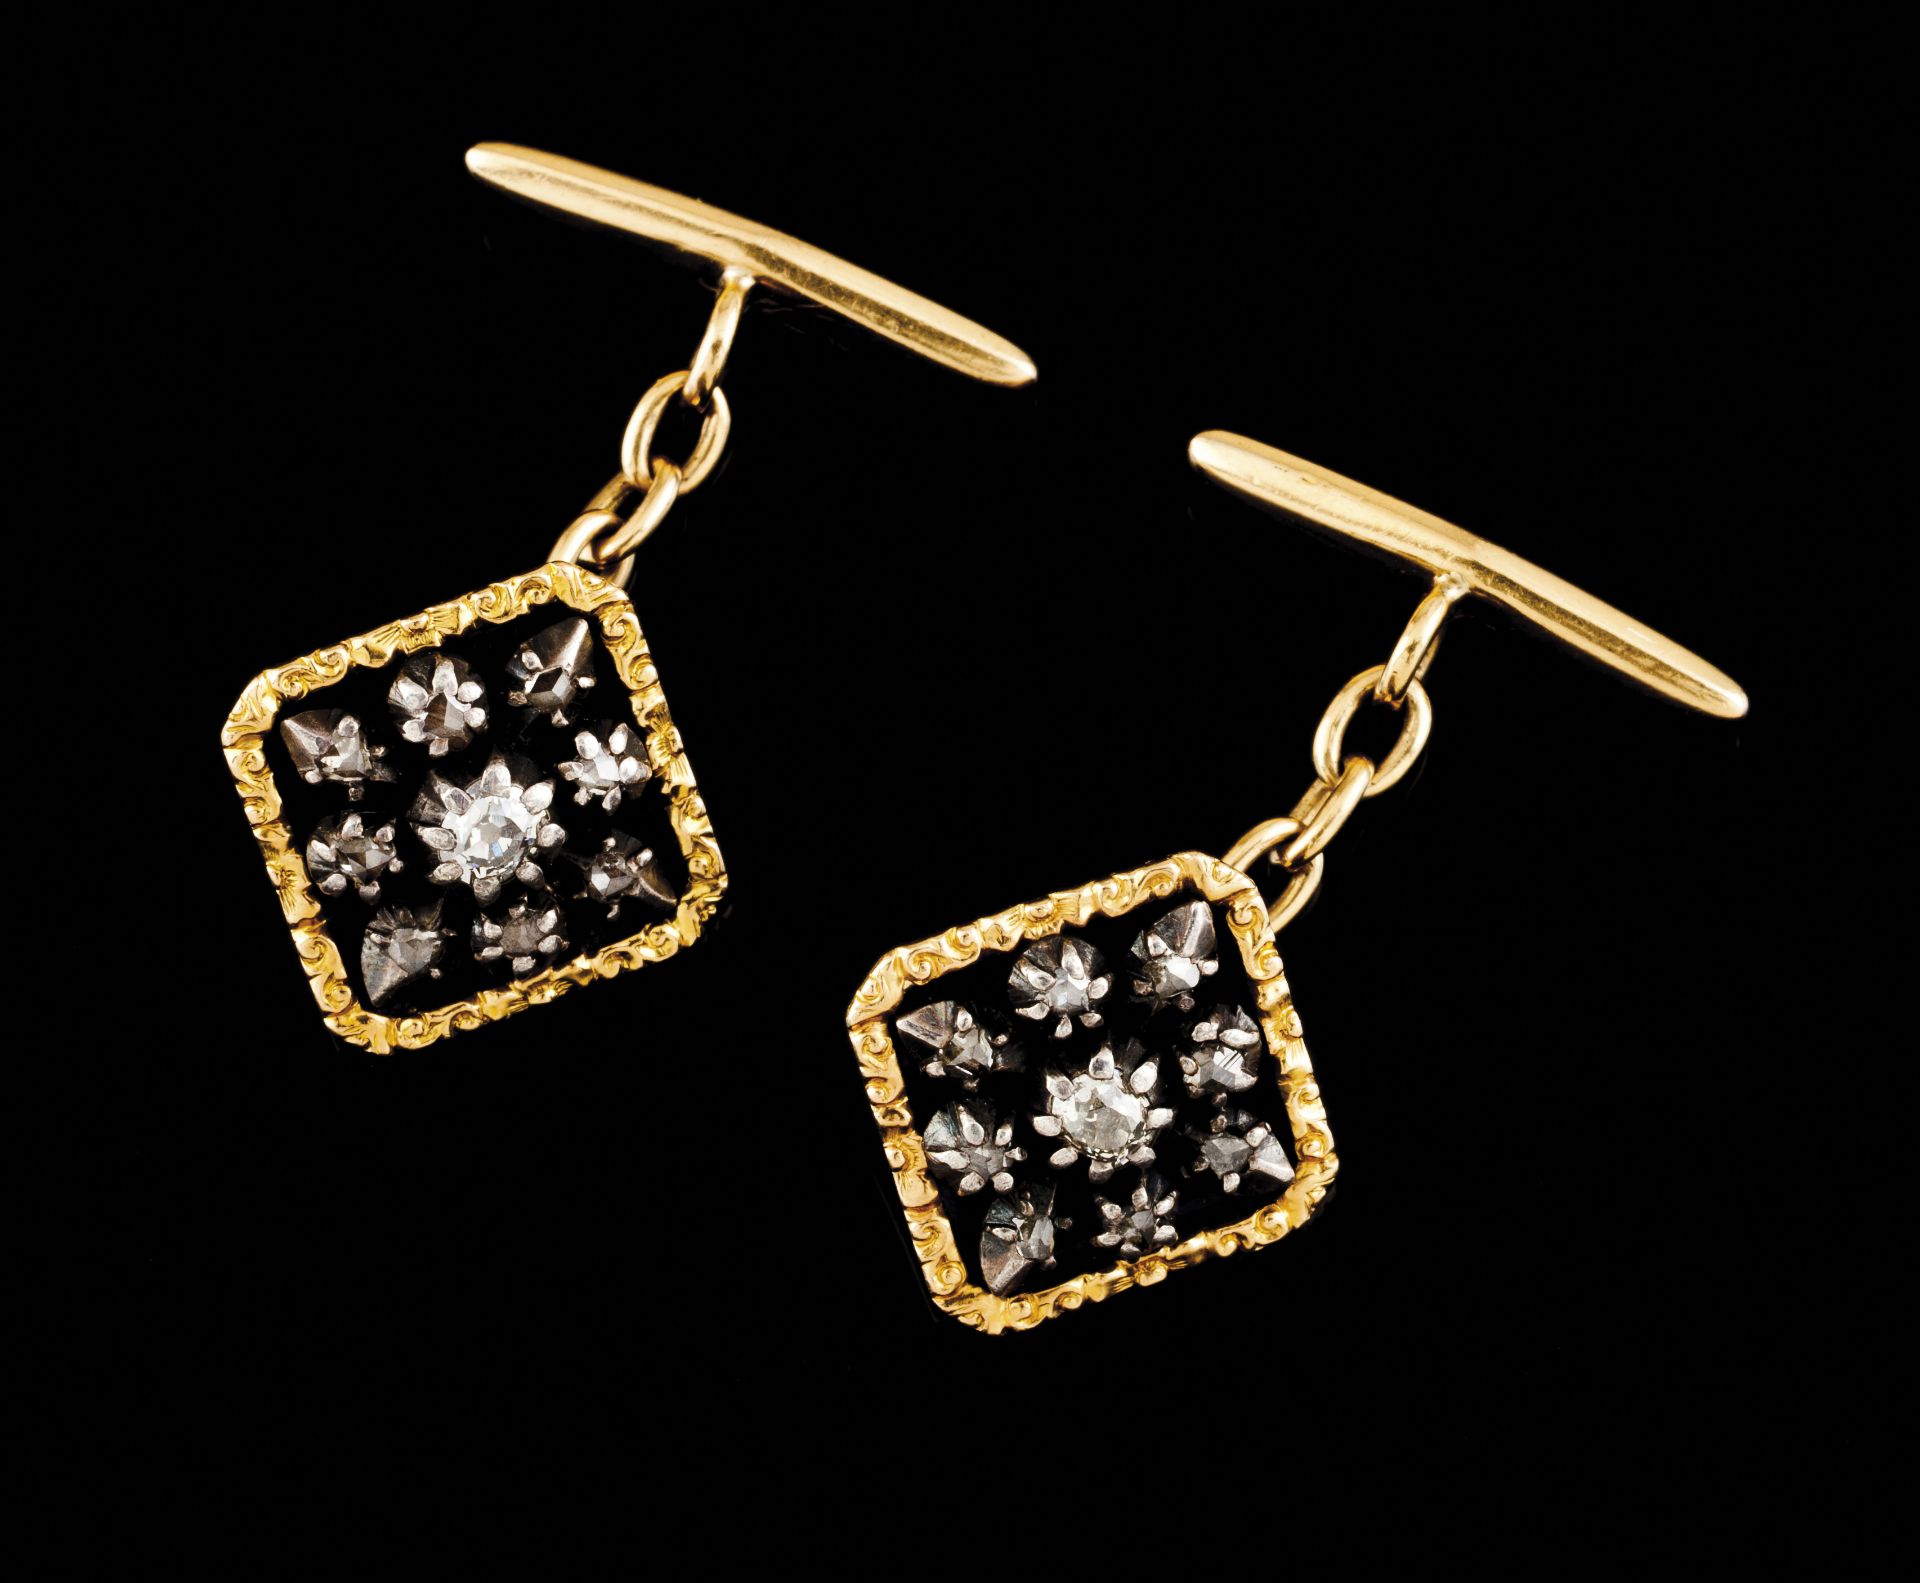 A pair of cufflinksGoldSquare shaped of black enamel background set with star of antique brilliant